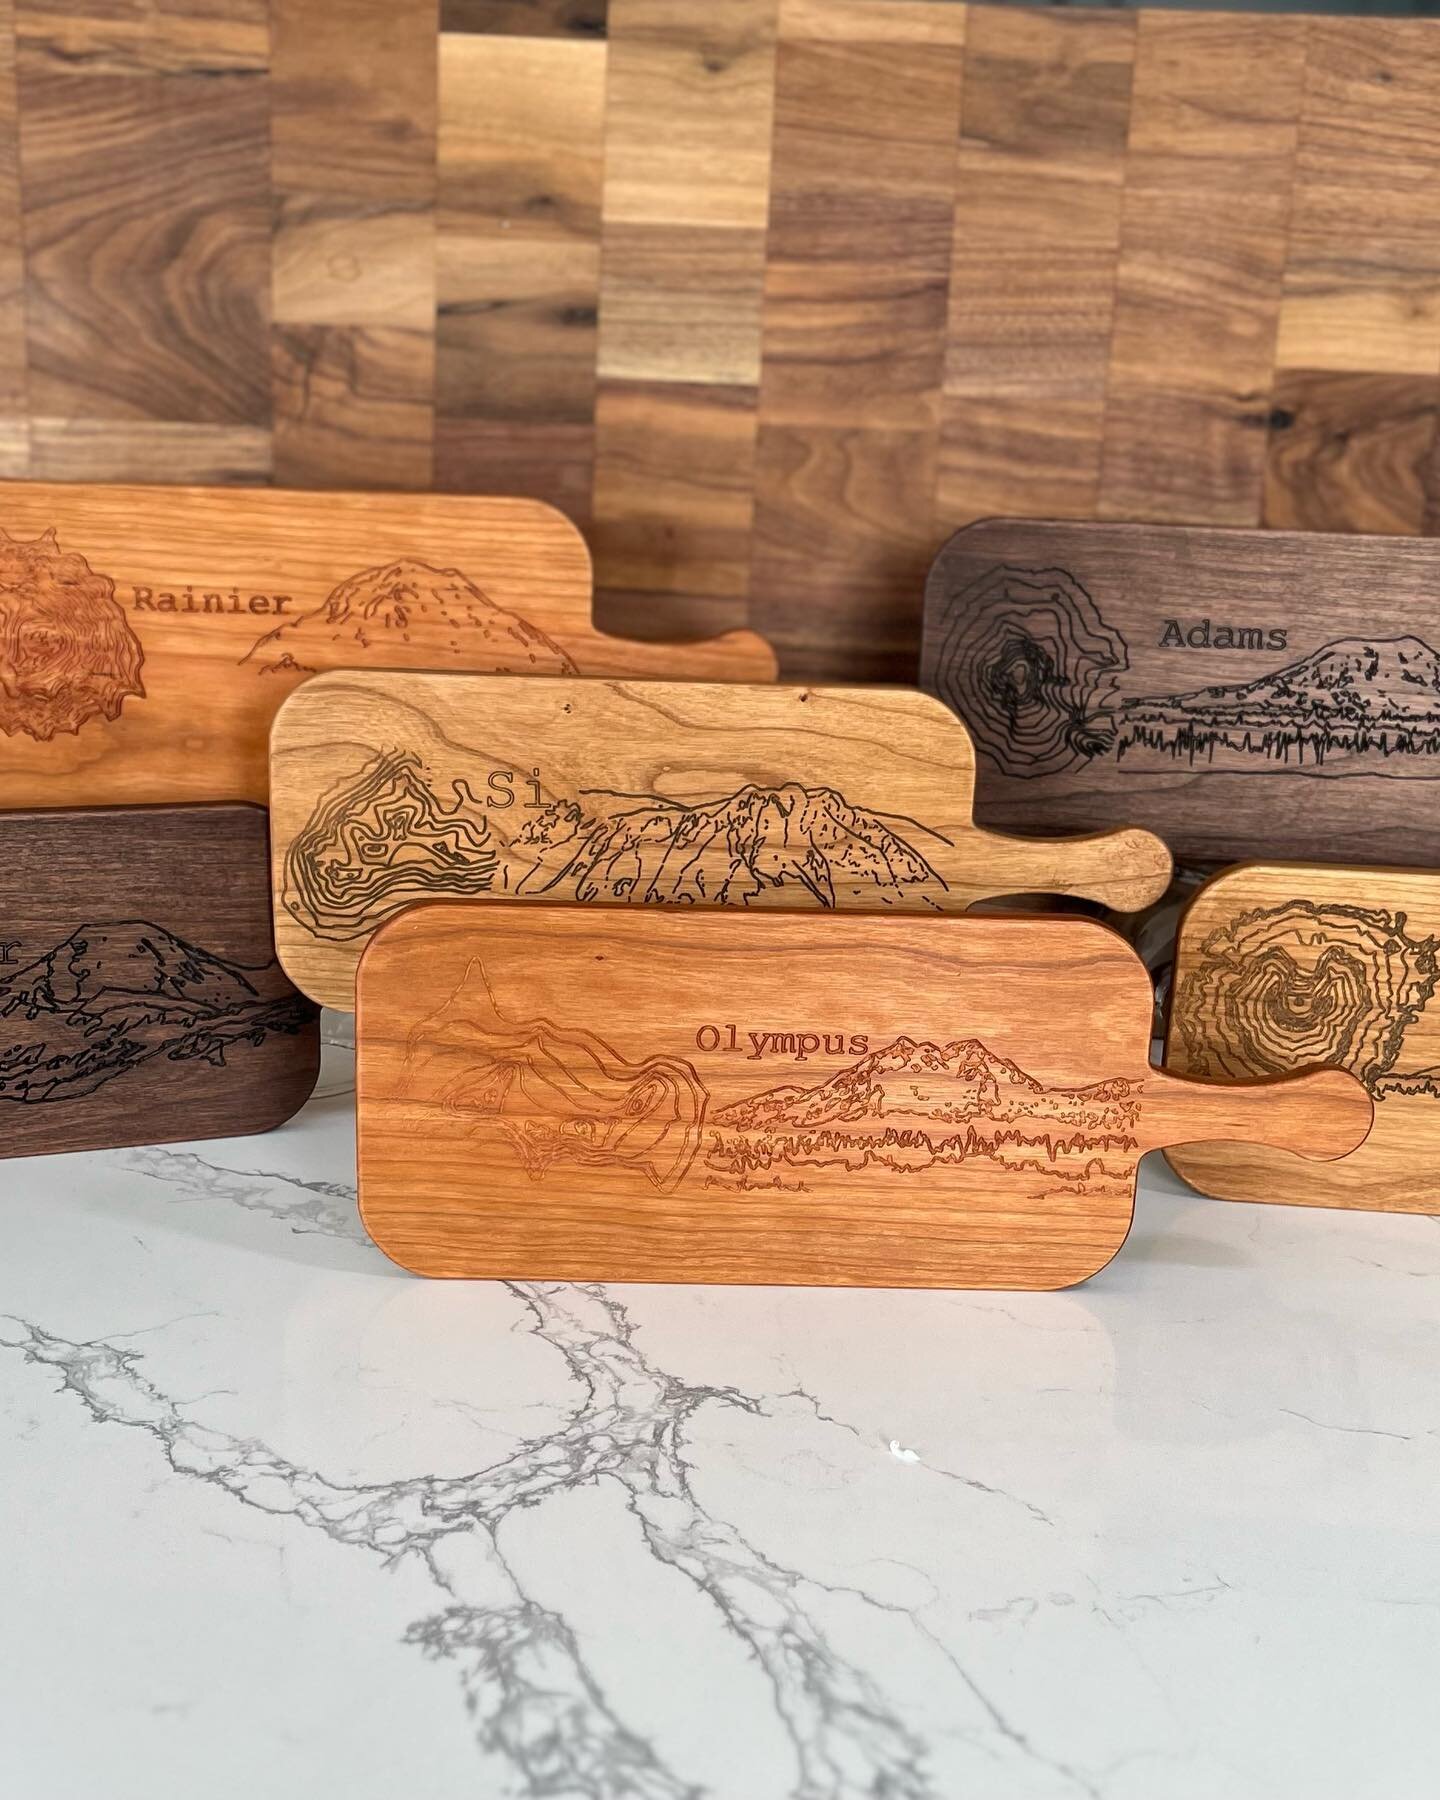 The mountains are out!  Come check out our new charcuterie boards featuring 6 of our beautiful mountains we have here in Washington.  We are also excited to announce we have 3 stain options available for ALL our wood products now. Which one do you li